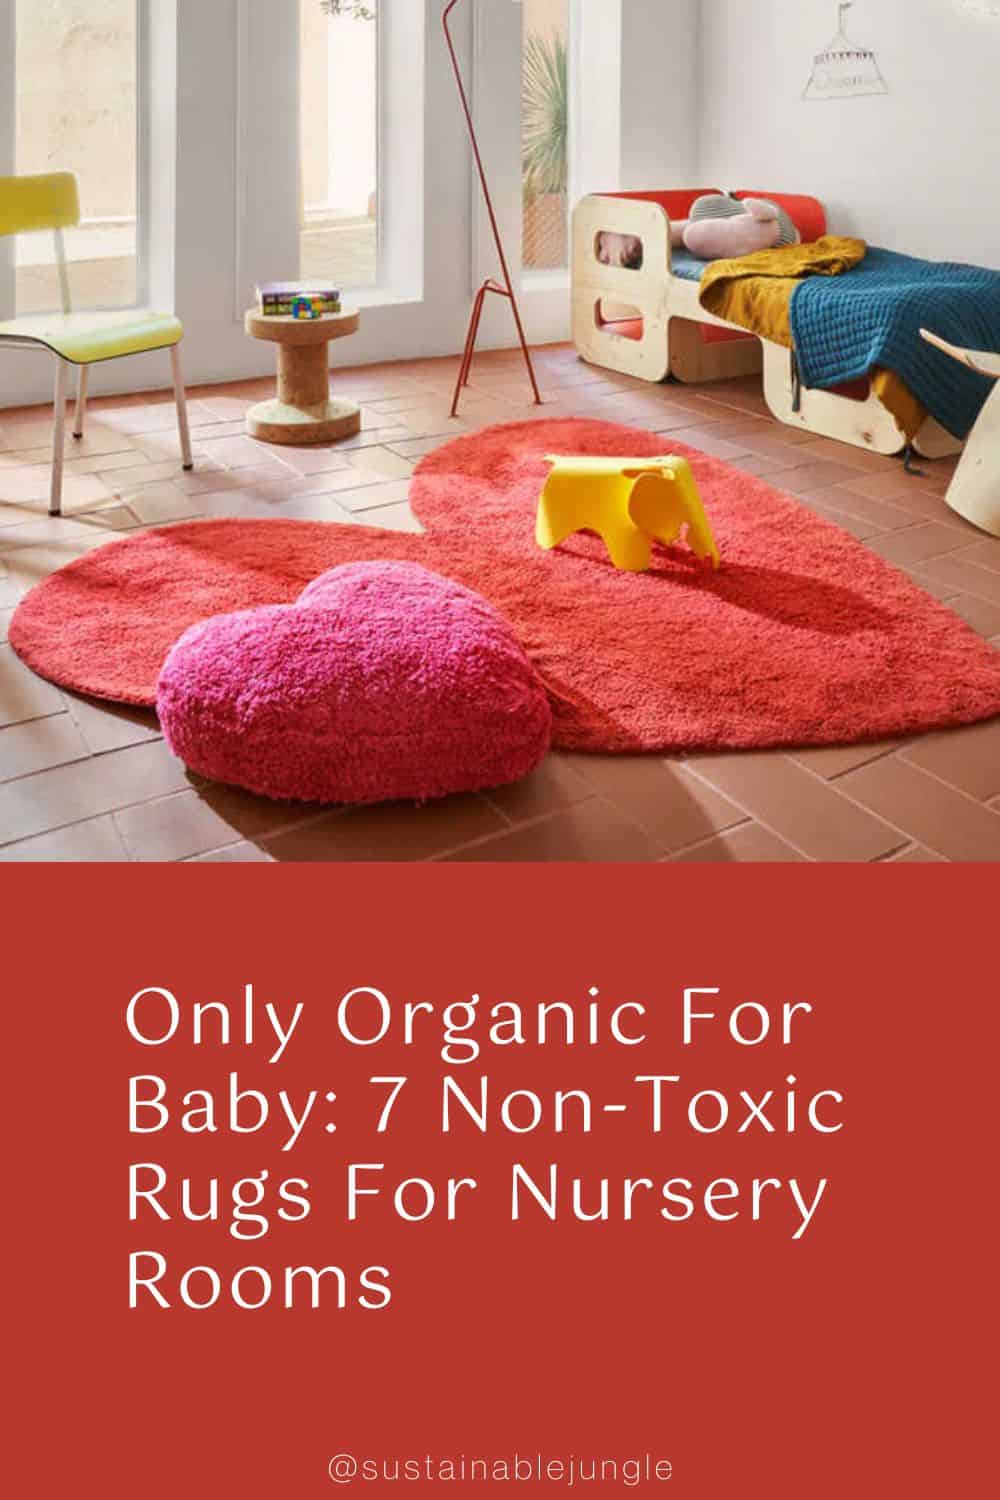 Only Organic For Baby: 7 Non-Toxic Rugs For Nursery Rooms Image by Lorena Canals #nontoxicrugsfornursury #nontoxicnursuryrugs #nontoxicbabyrugs #organicnursuryrugs #nontoxicrugsforbaby #sustainablejungle